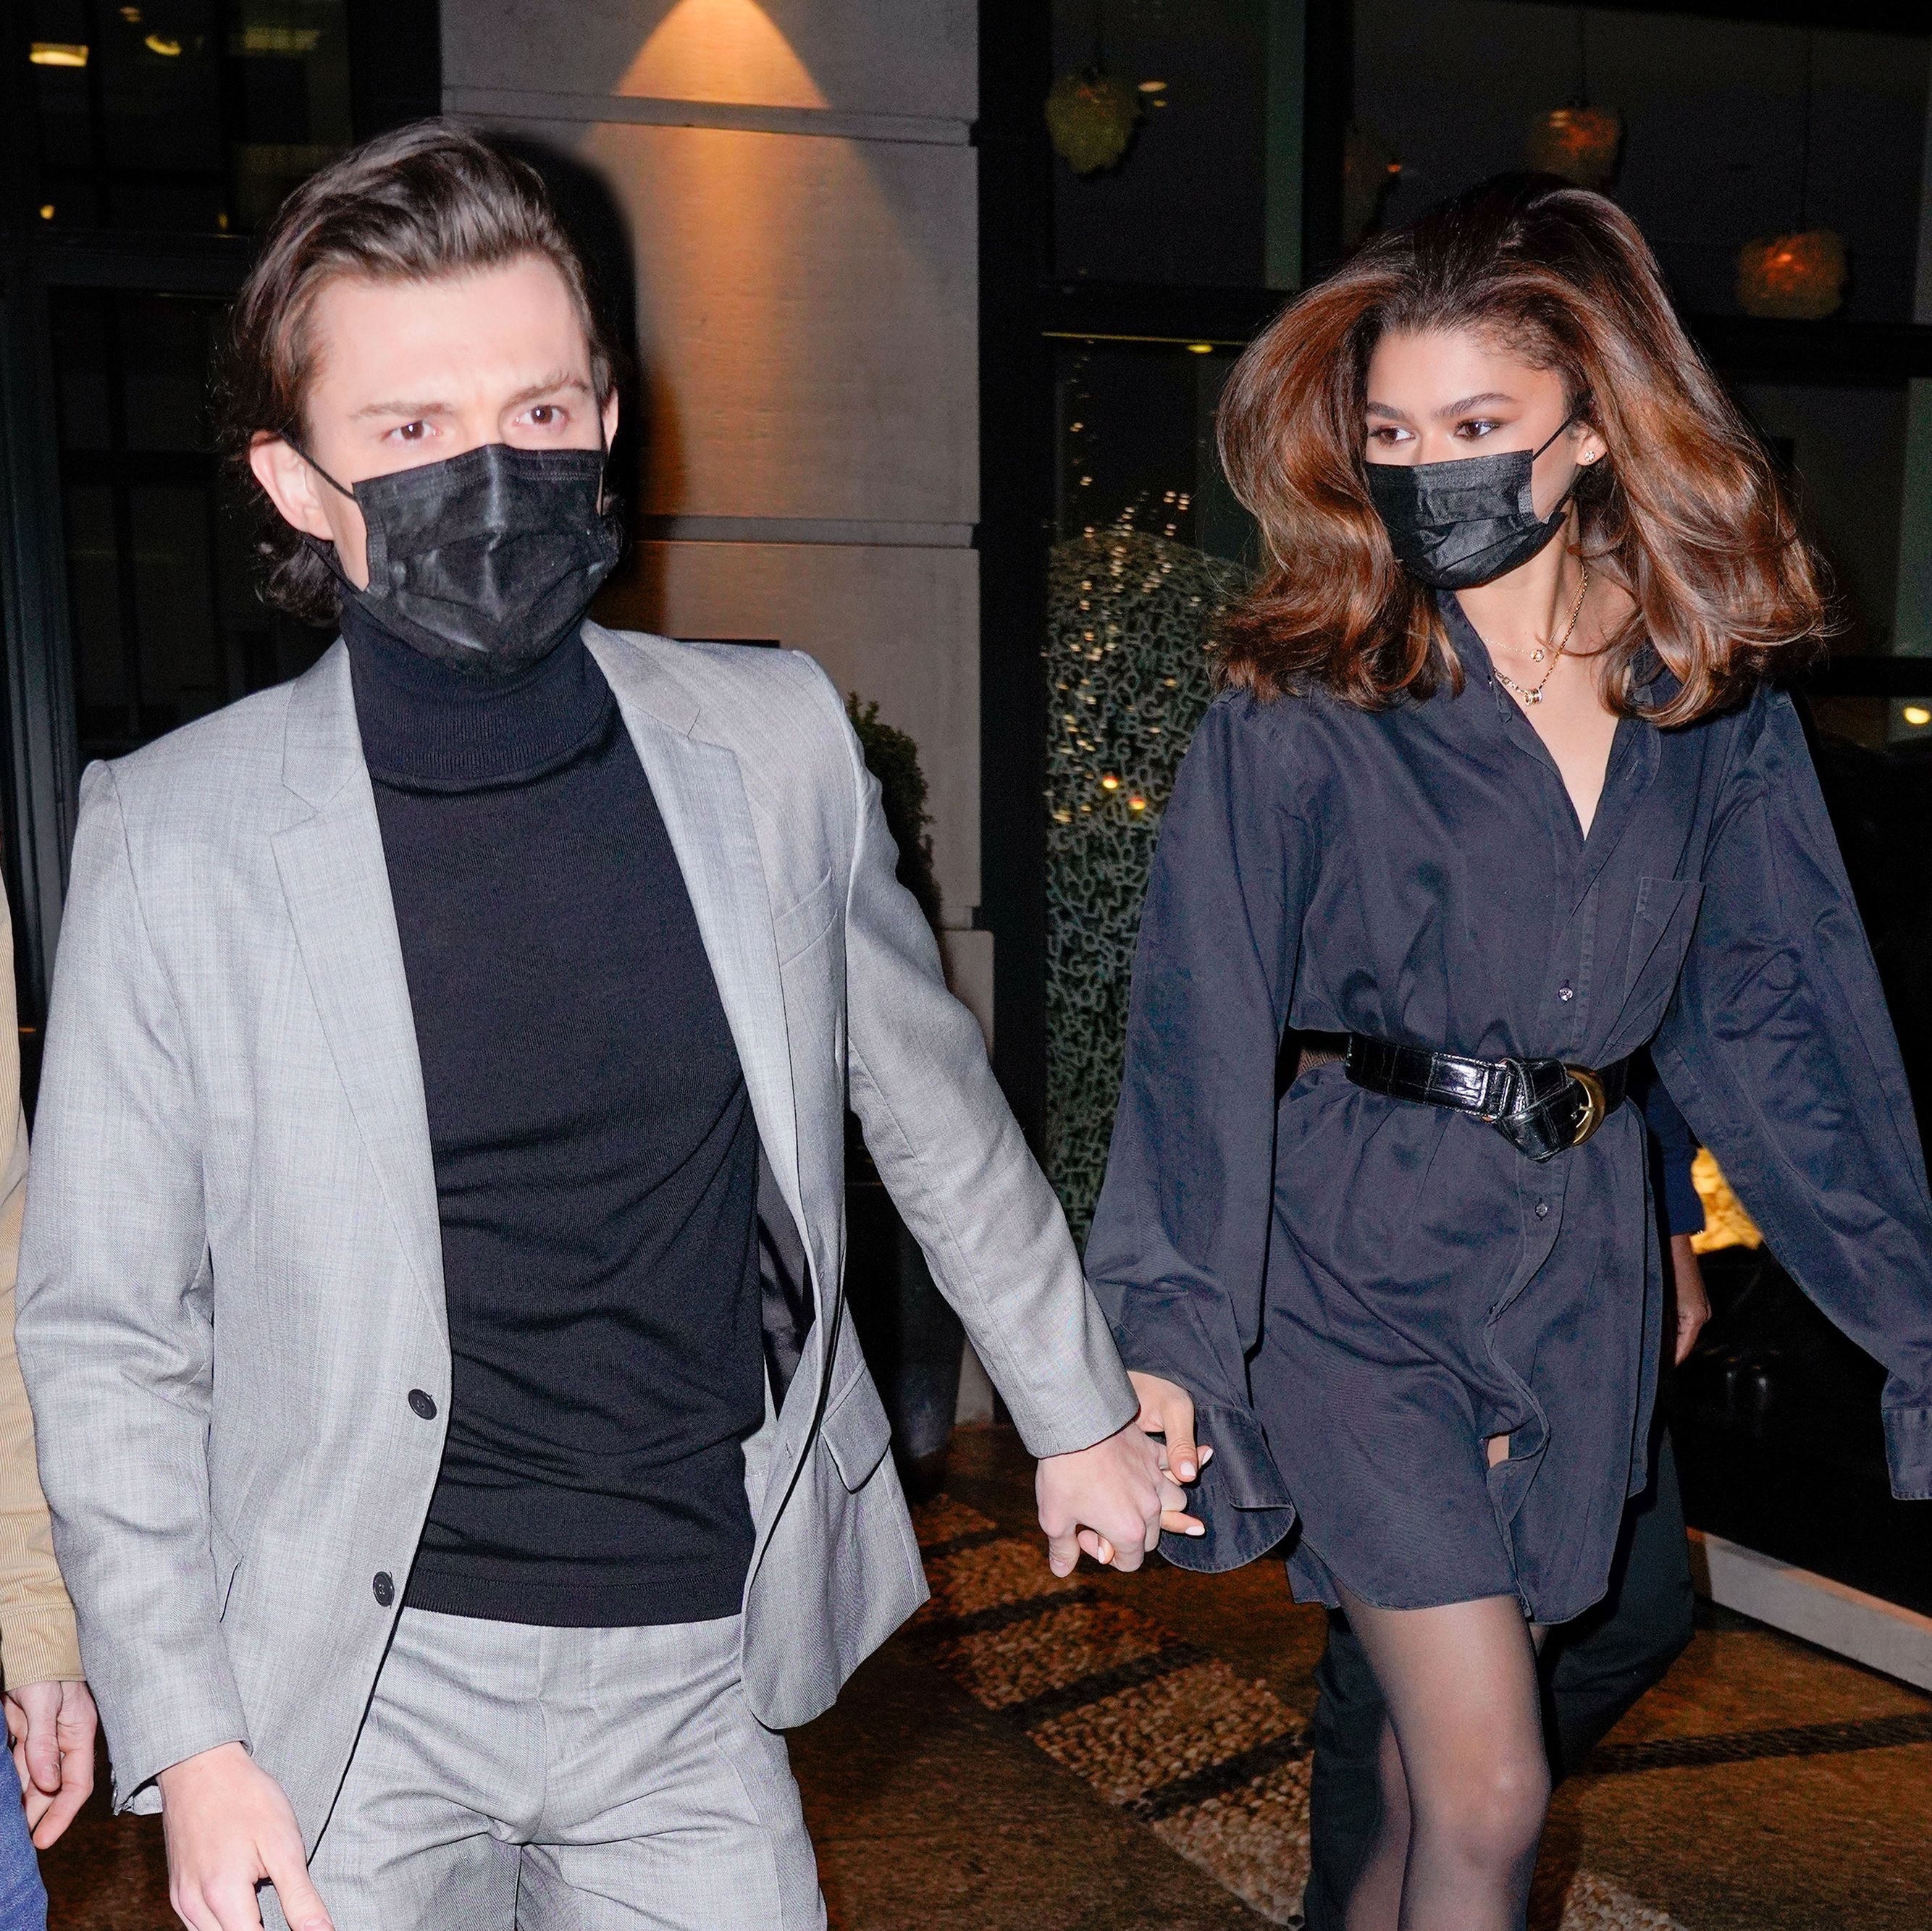 The private couple gave paparazzi a very public look at their love story.